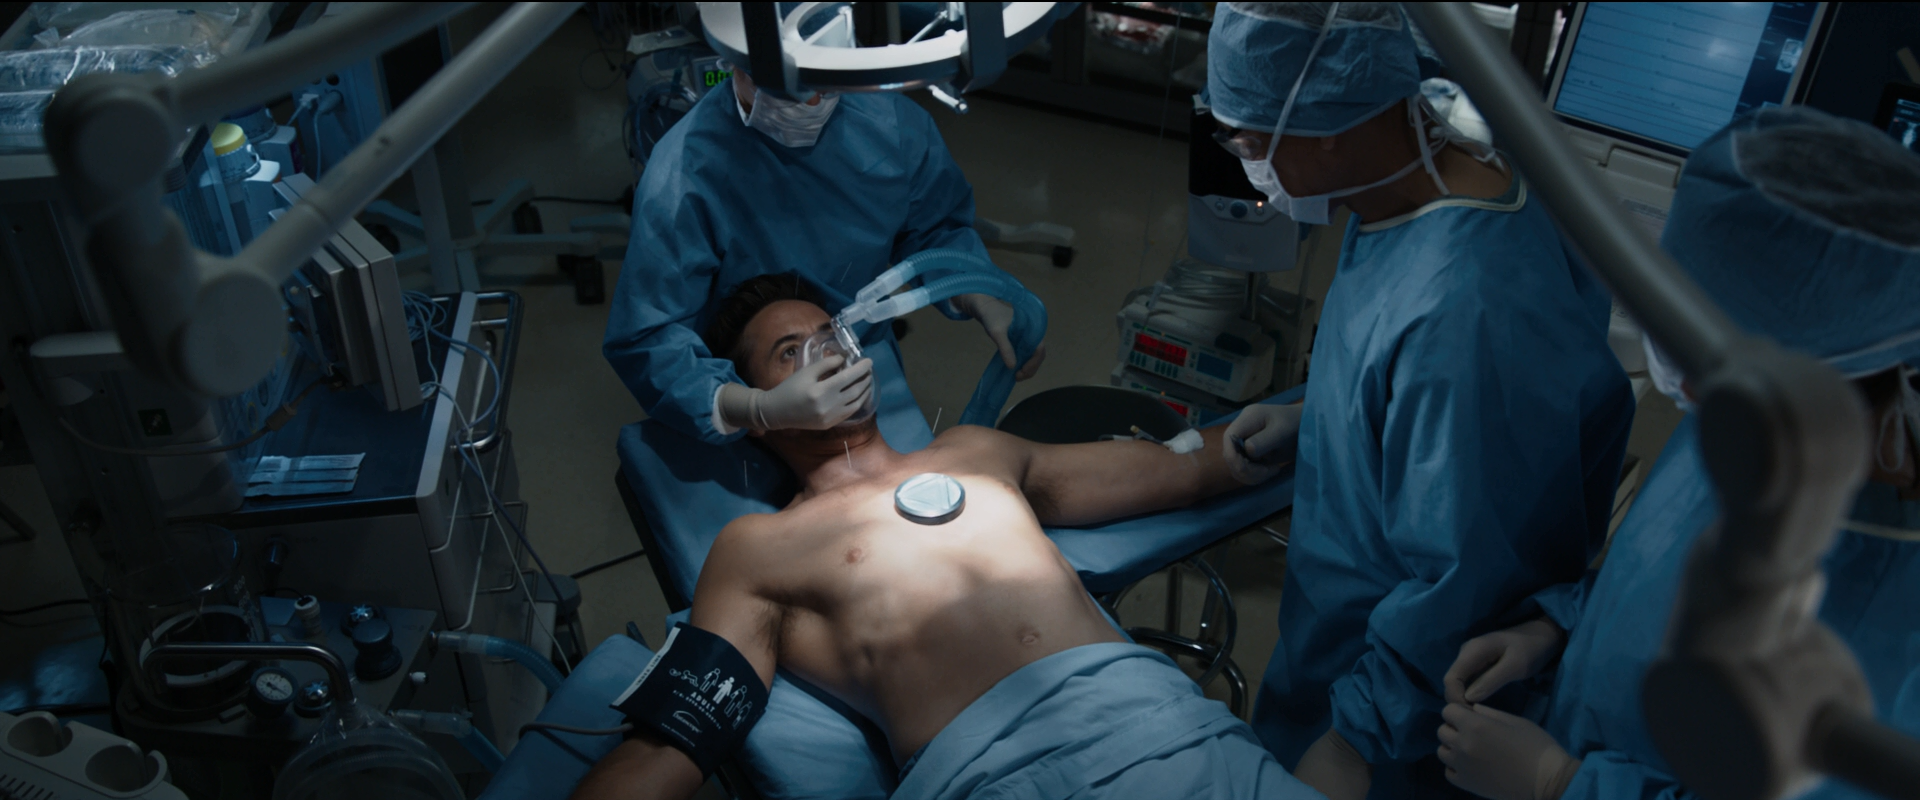 Tony Stark during the operation to remove shrapnel from his chest in Iron Man 3 (2013).